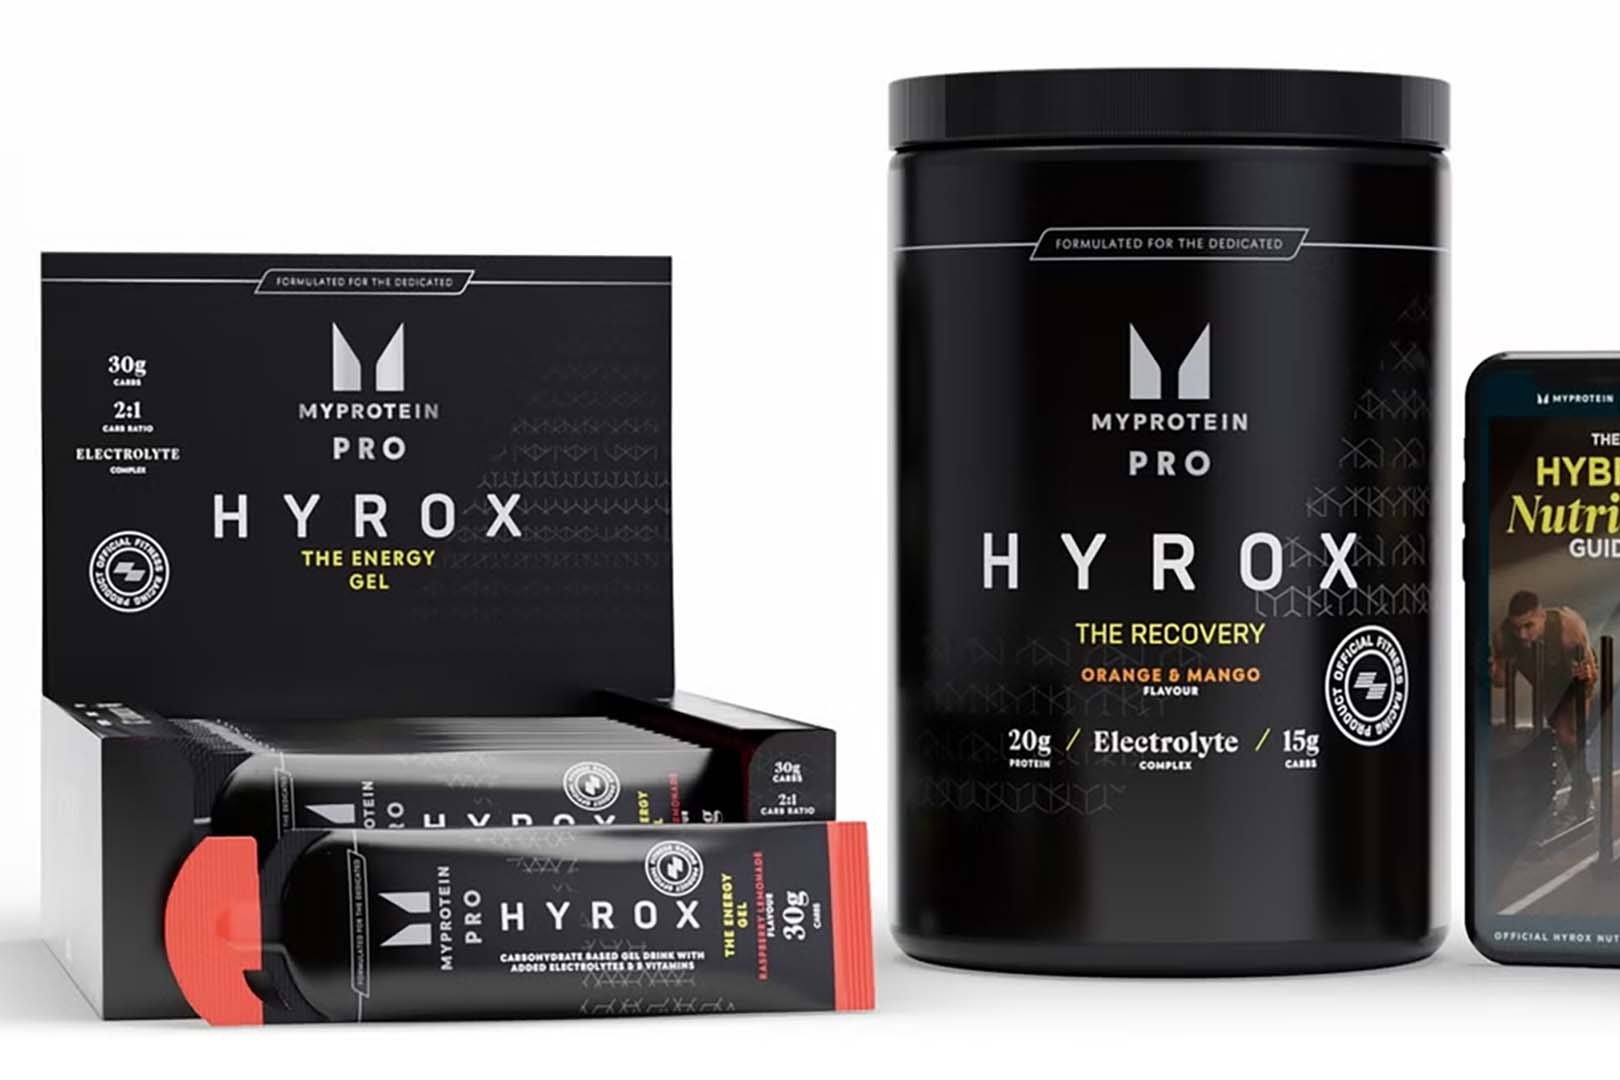 Where To Buy Myprotein And Hyrox Products